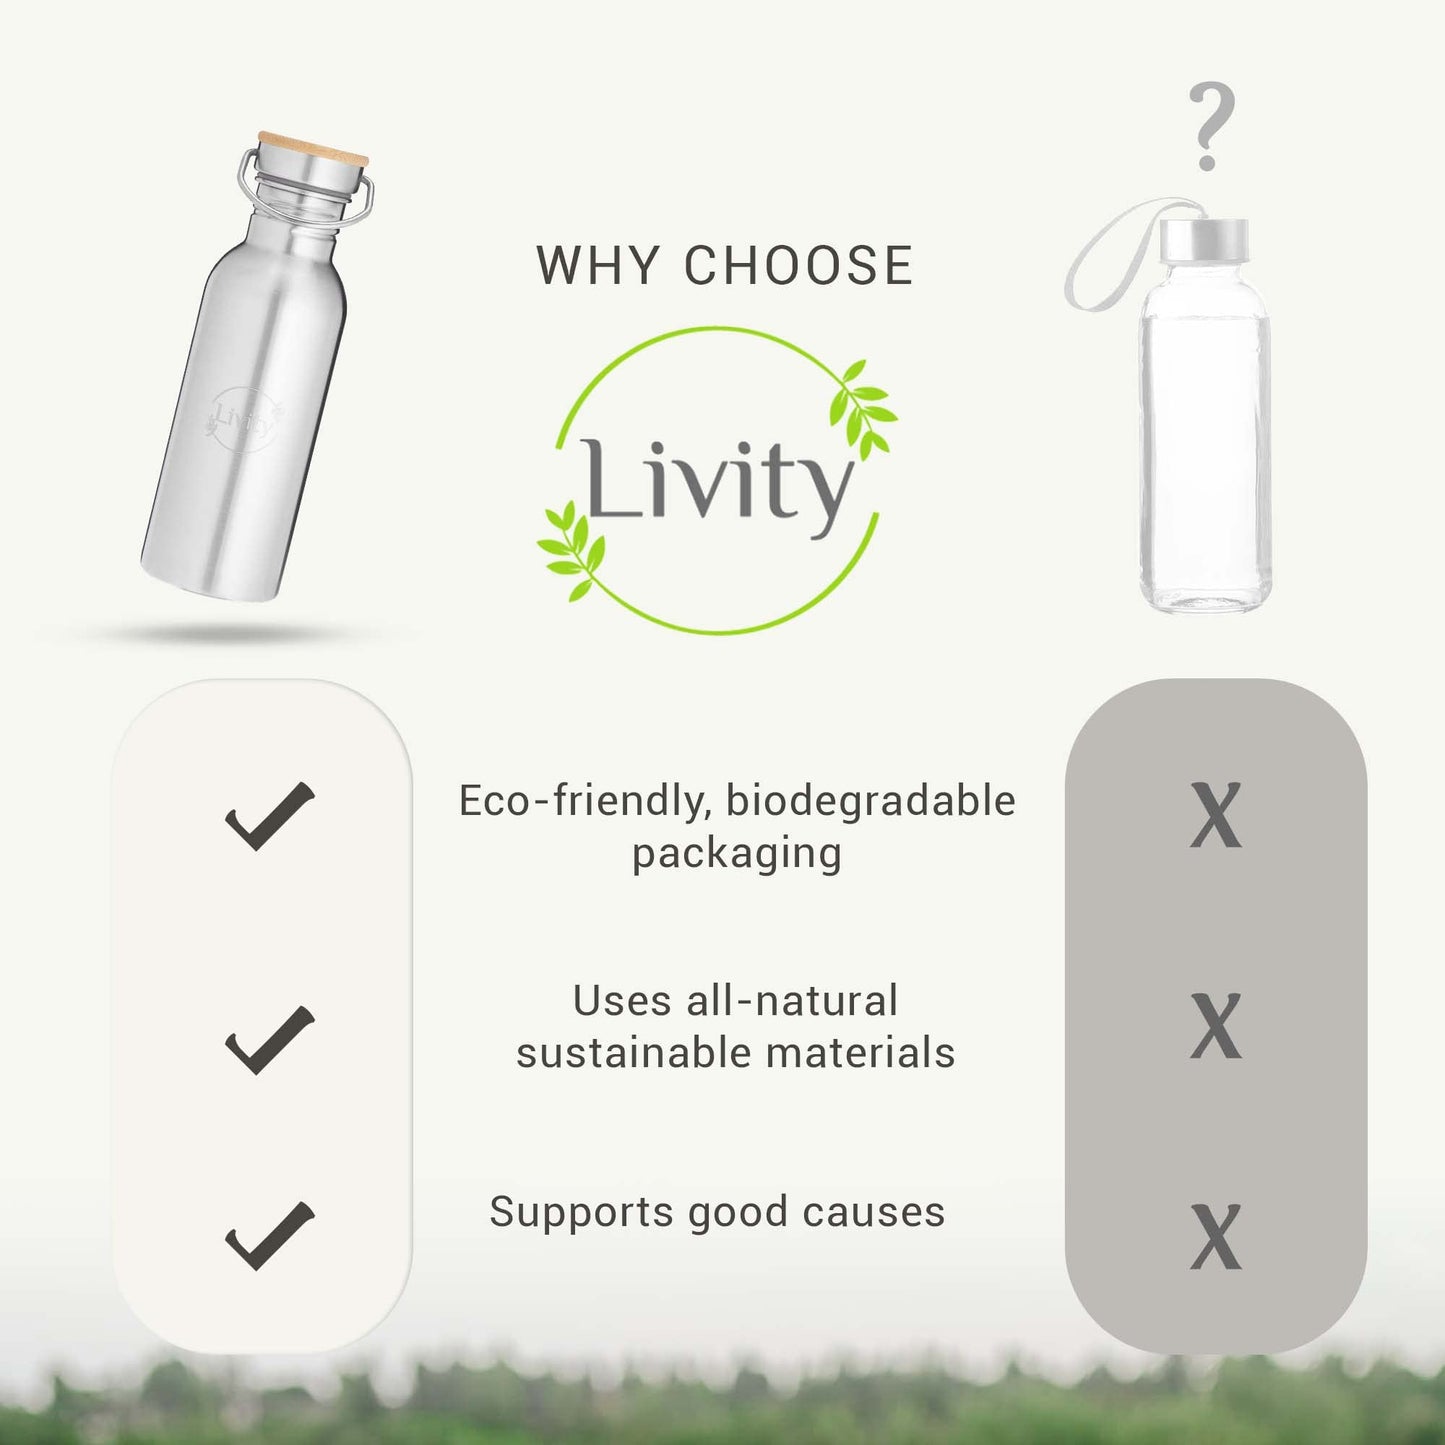 Livity Yoga - Stainless Steel Insulated Water Bottle, Slimline Water Bottle, Food-Grade, Durable & Dishwasher-Safe, Travel Water Bottle for Yoga, Pilates, and Workout, 20 Oz